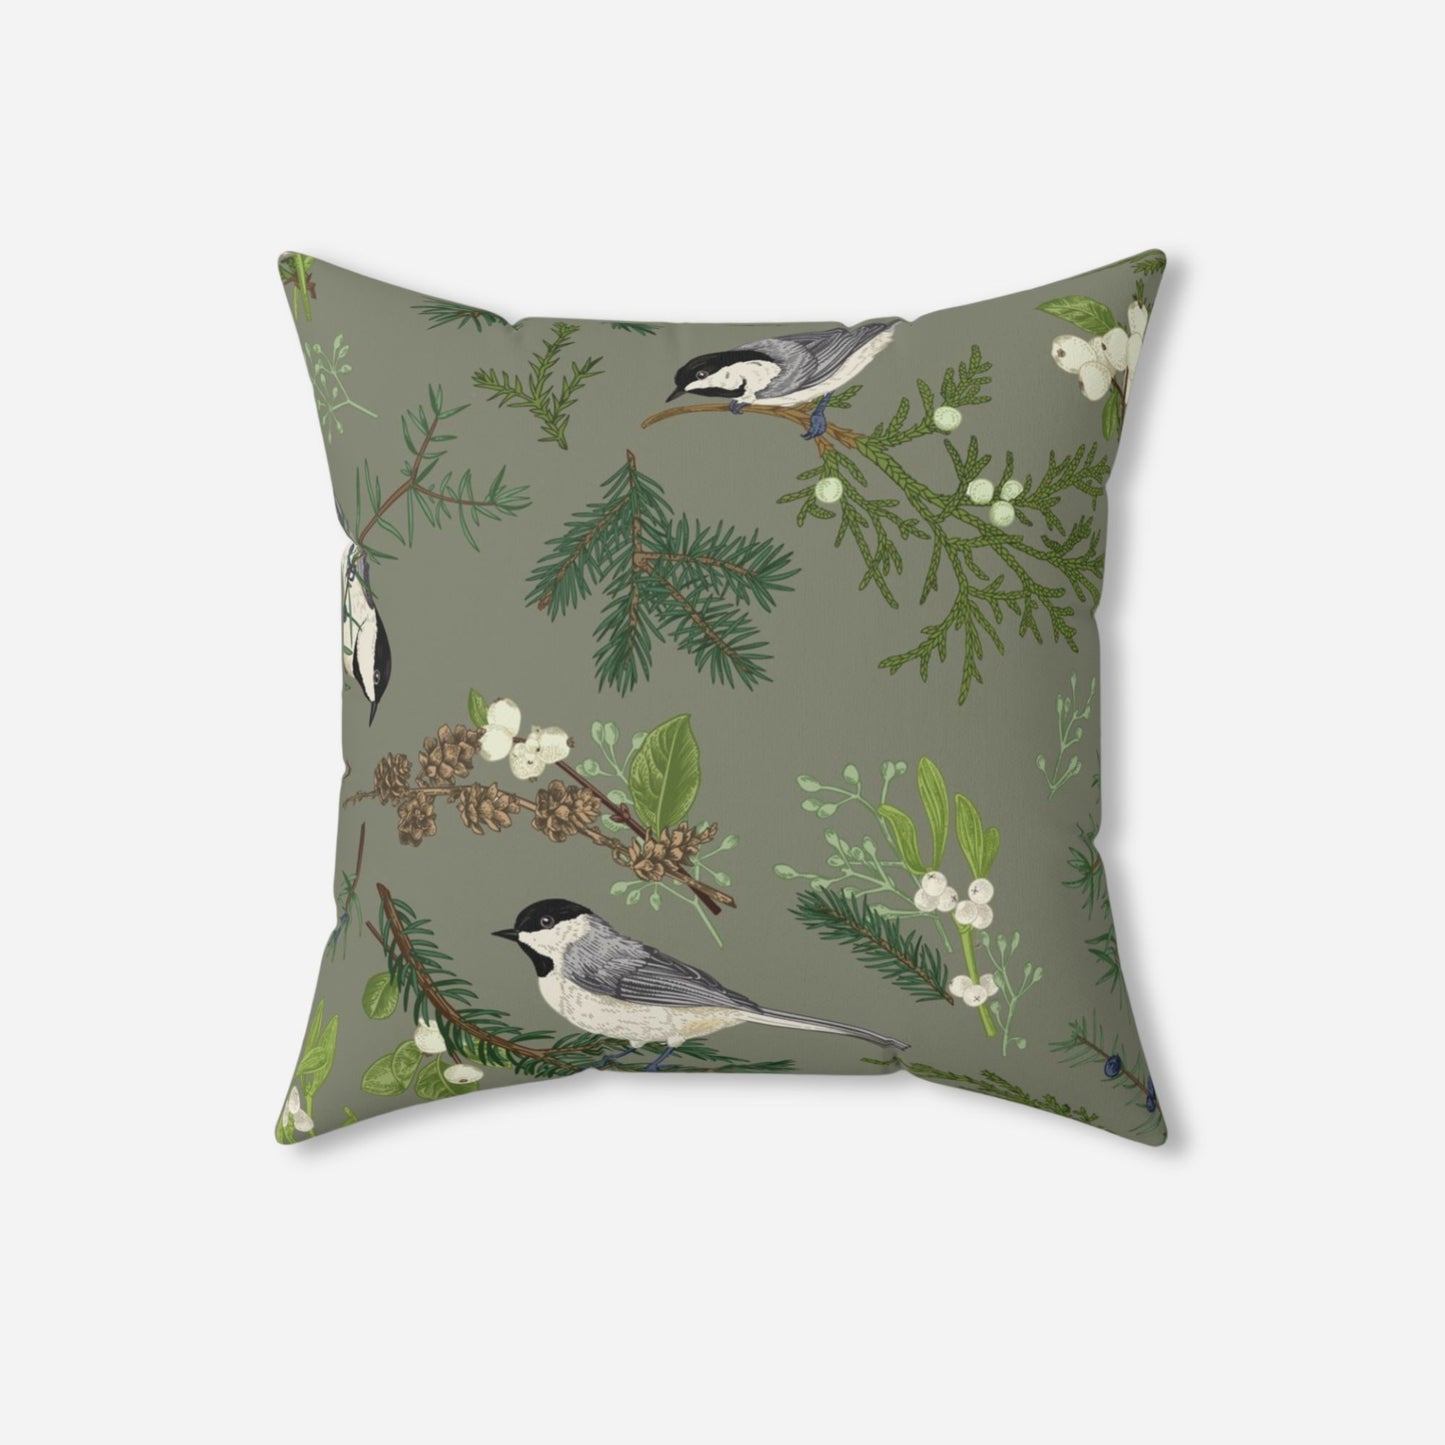 Decorative throw pillow with a nature-inspired design featuring chickadee birds perched on pine branches and sprigs of mistletoe on a muted green background.